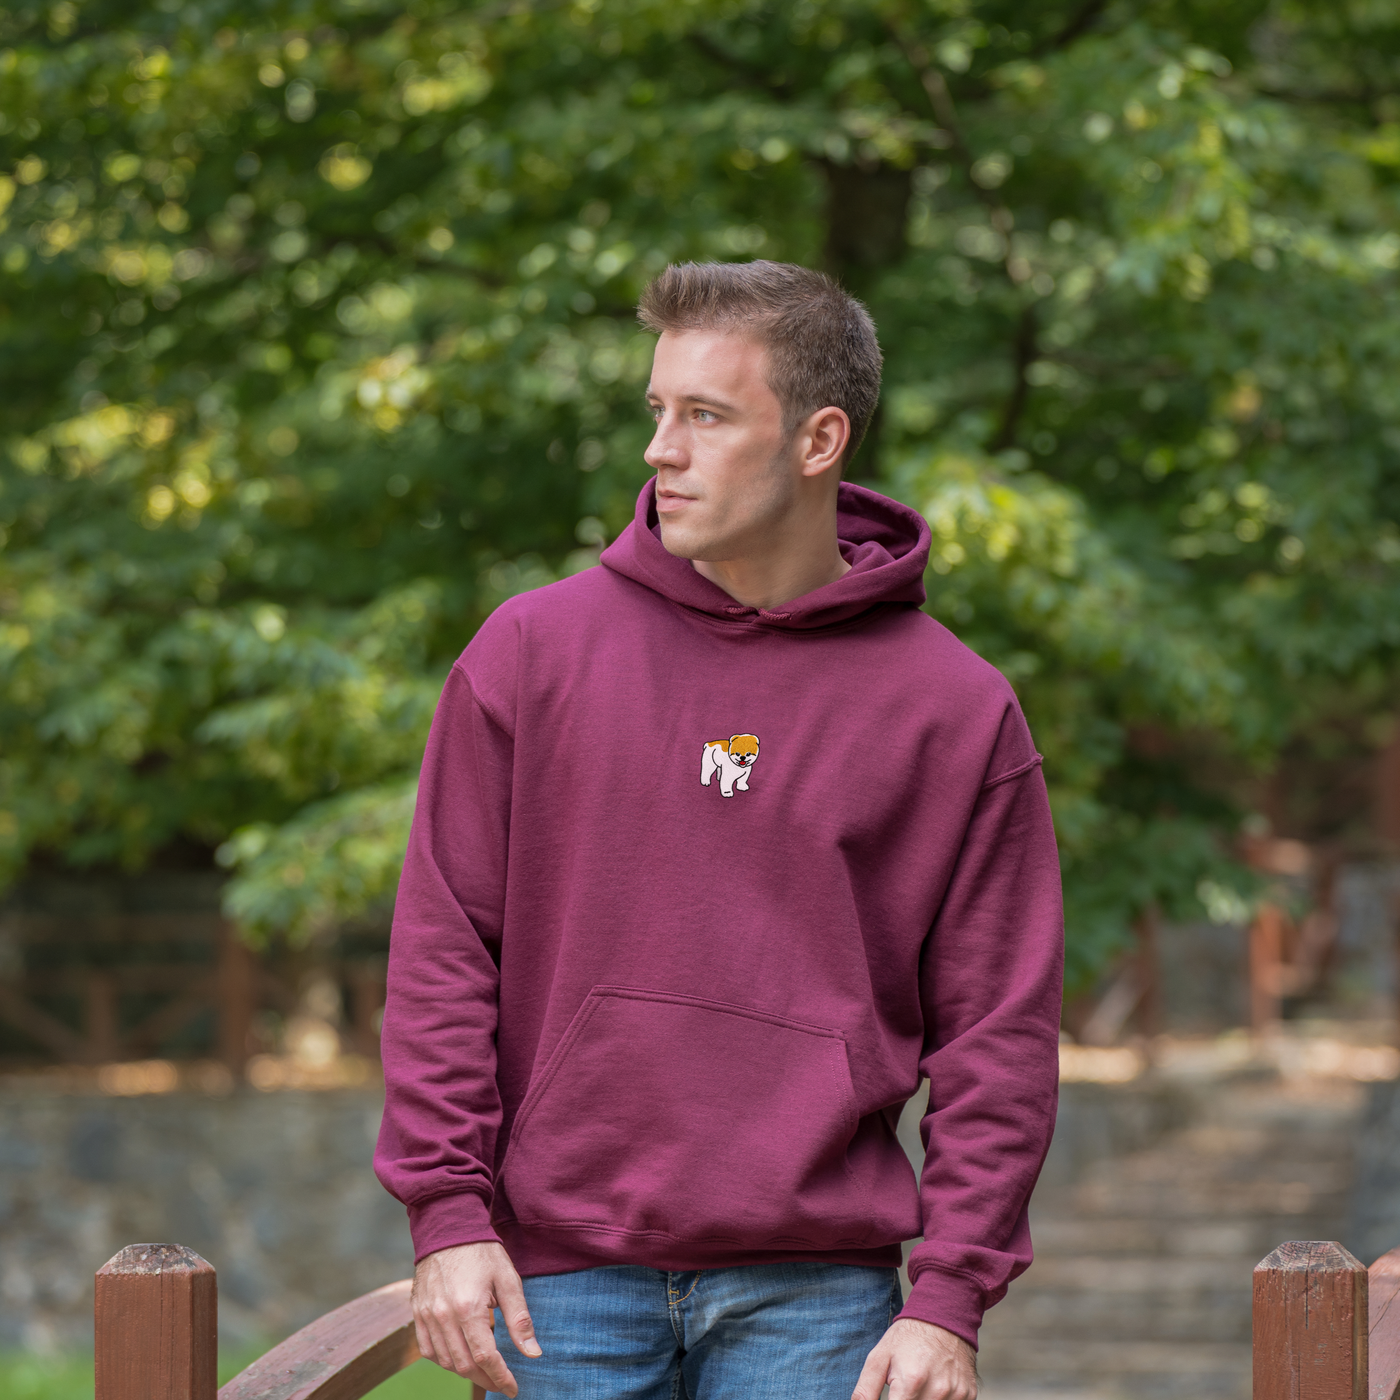 Bobby's Planet Men's Embroidered Pomeranian Hoodie from Paws Dog Cat Animals Collection in Maroon Color#color_maroon